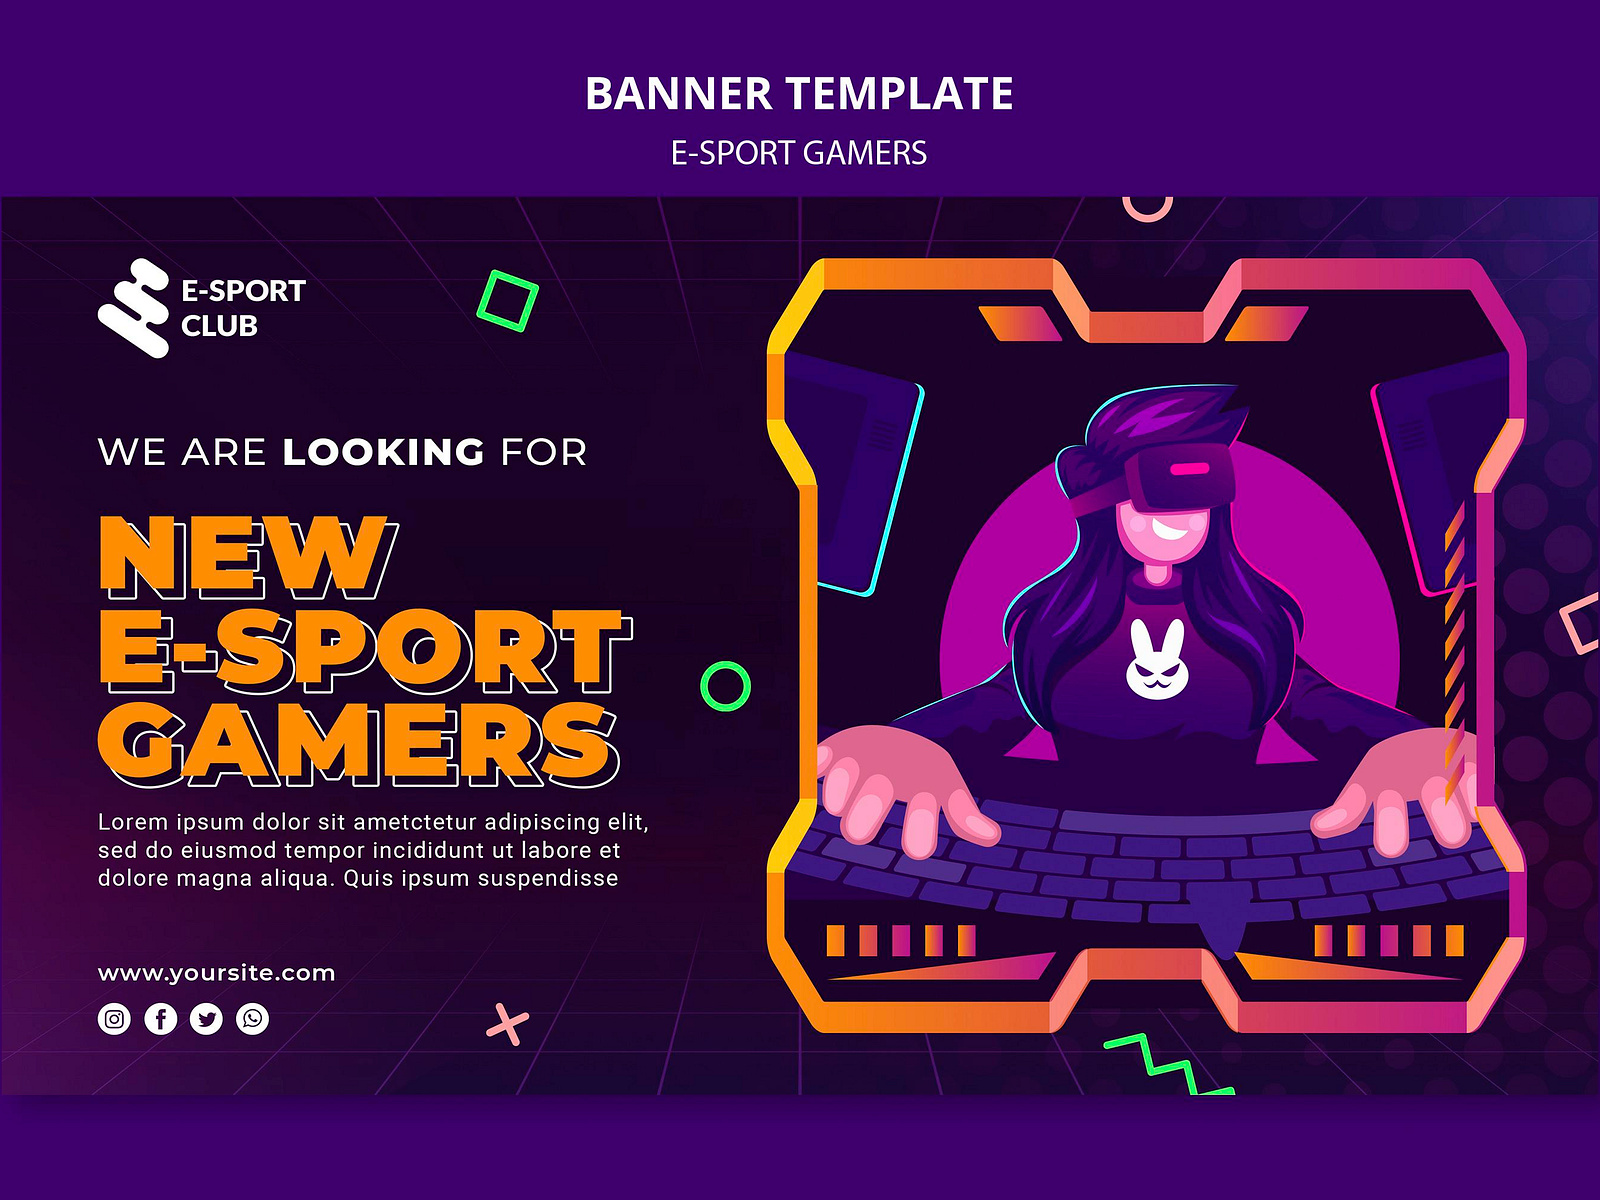 Banners for Gaming Streamers by Amelia Williams on Dribbble